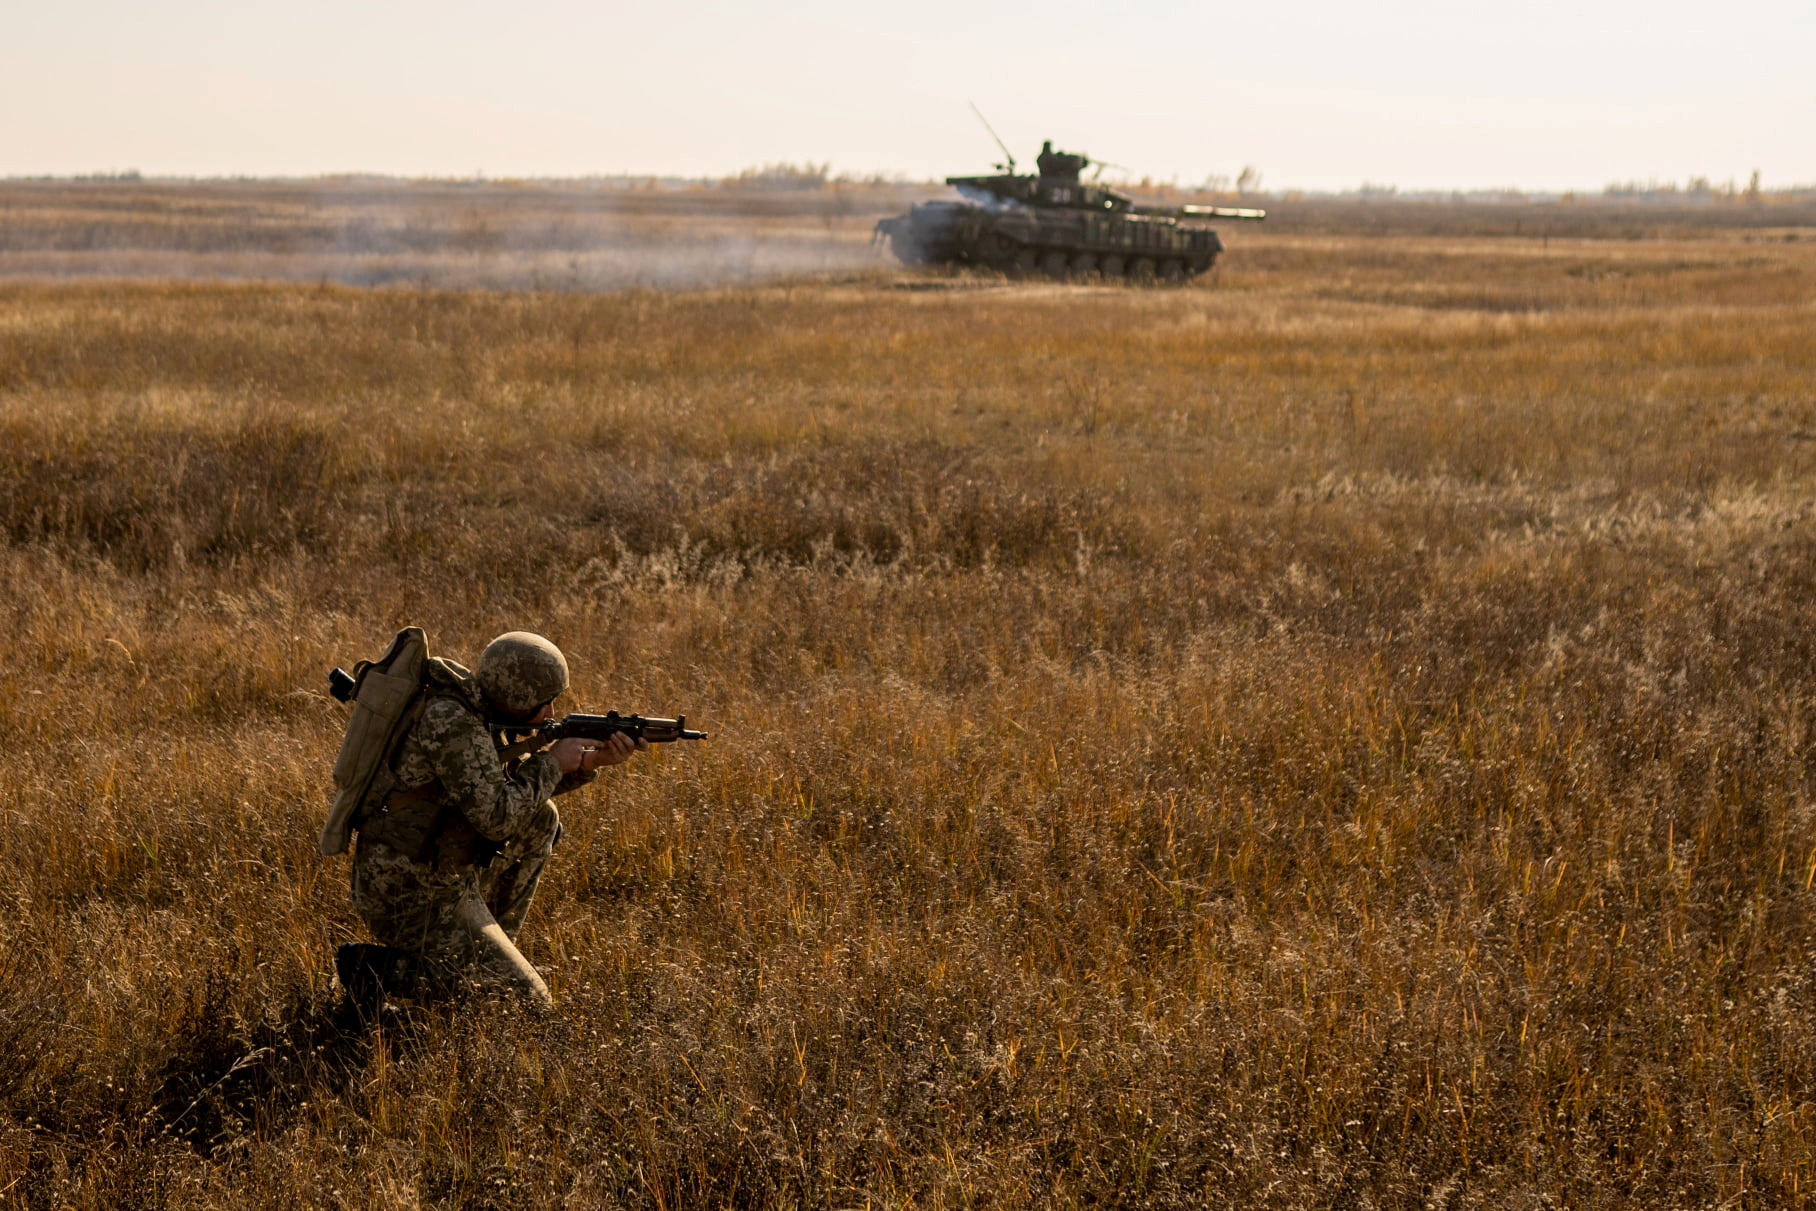 A serviceman of the Ukrainian Armed Forces takes part in military drills at a training ground near the border with Russian-annexed Crimea in Kherson region, Ukraine, in this handout picture released by the General Staff of the Armed Forces of Ukraine press service November 17, 2021. Press Service of General Staff of the Armed Forces of Ukraine/Handout via REUTERS/File Photo